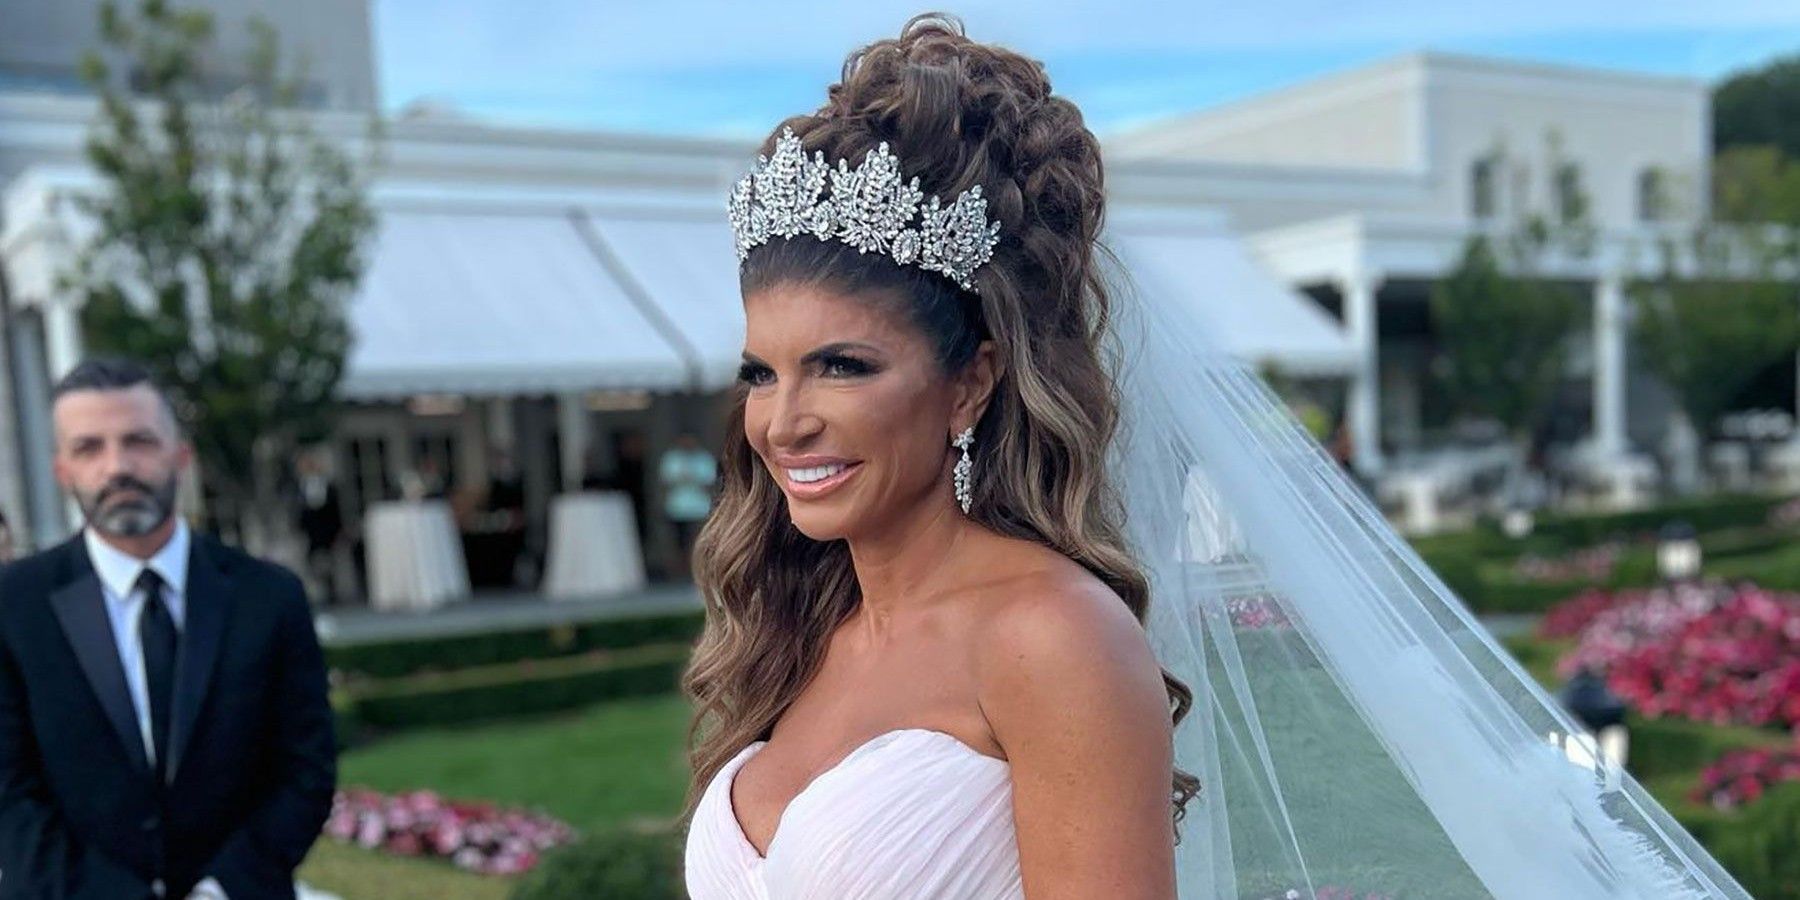 Teresa Giudice from The Real Housewives of New Jersey on her wedding day